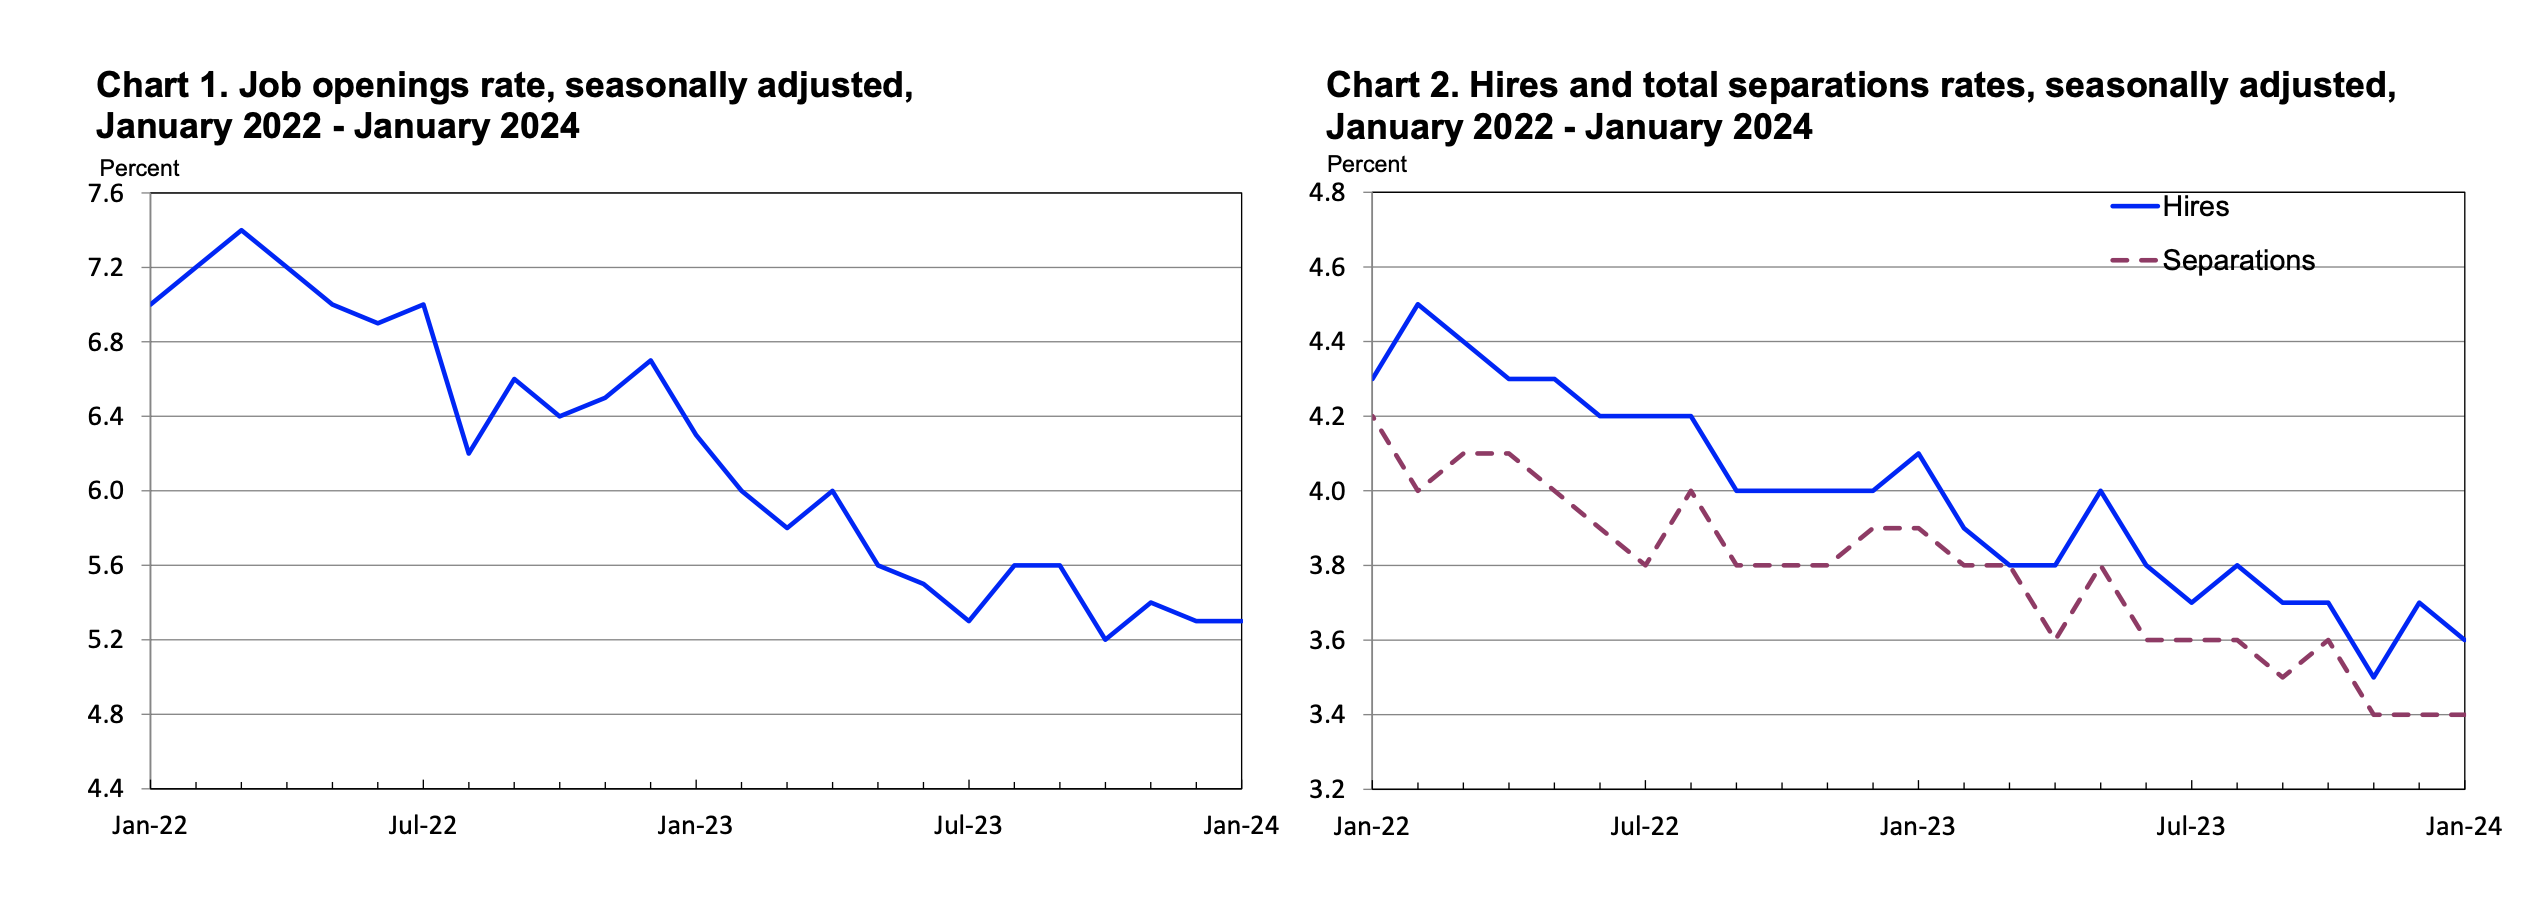 2024 Labor Department charts on job openings, hires, and total separations rates